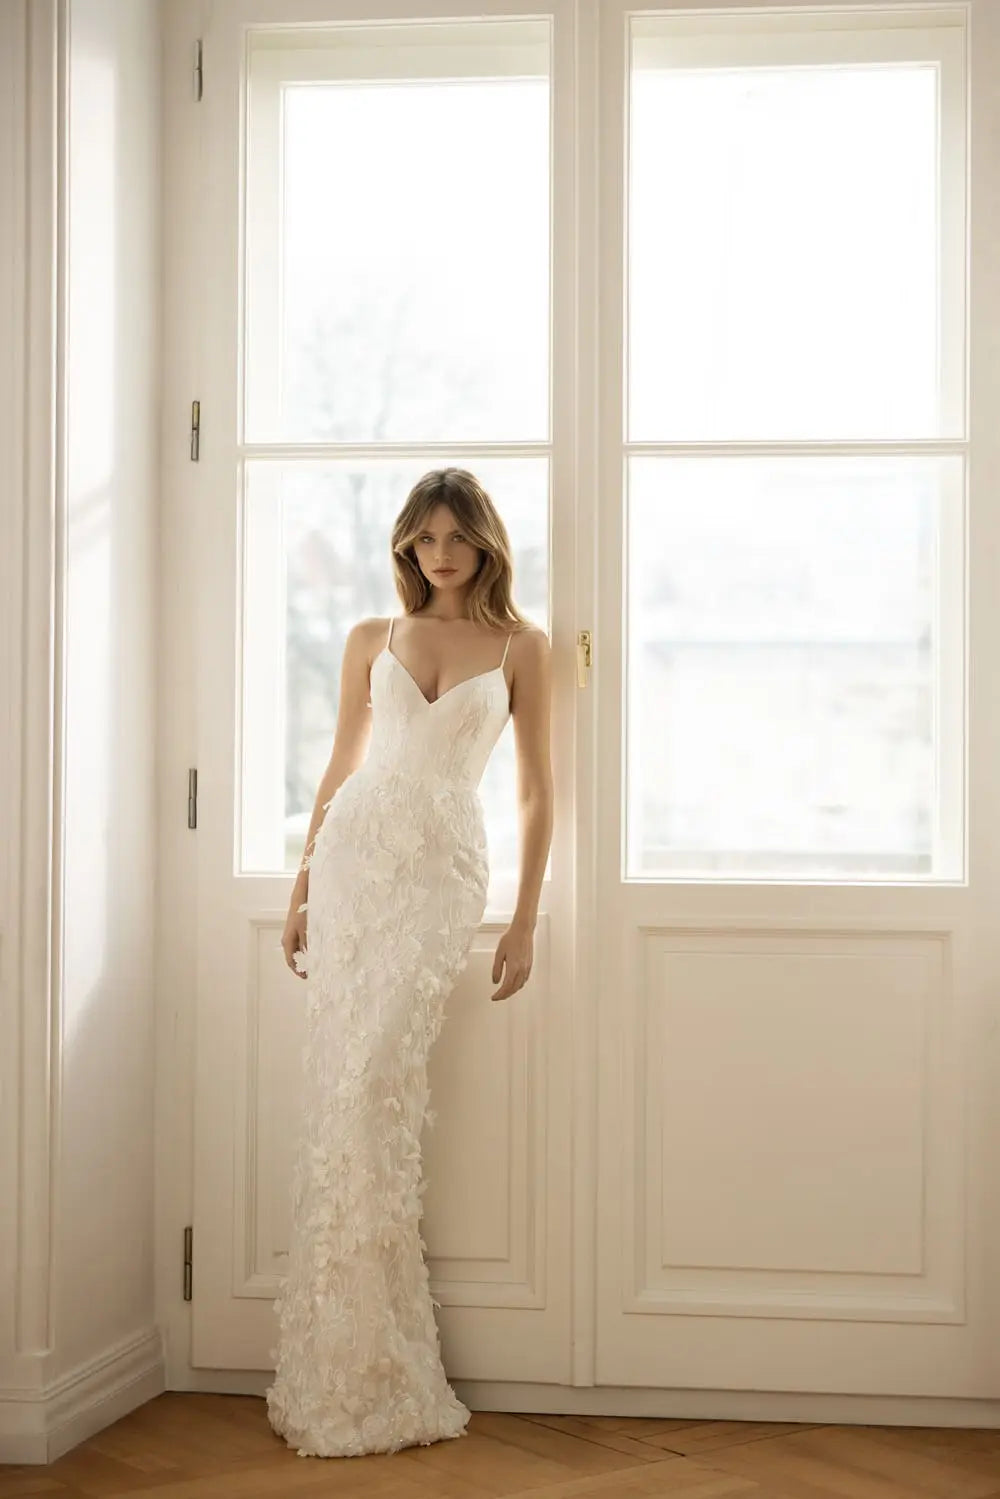 3d floral lace wedding dress - available off the rack